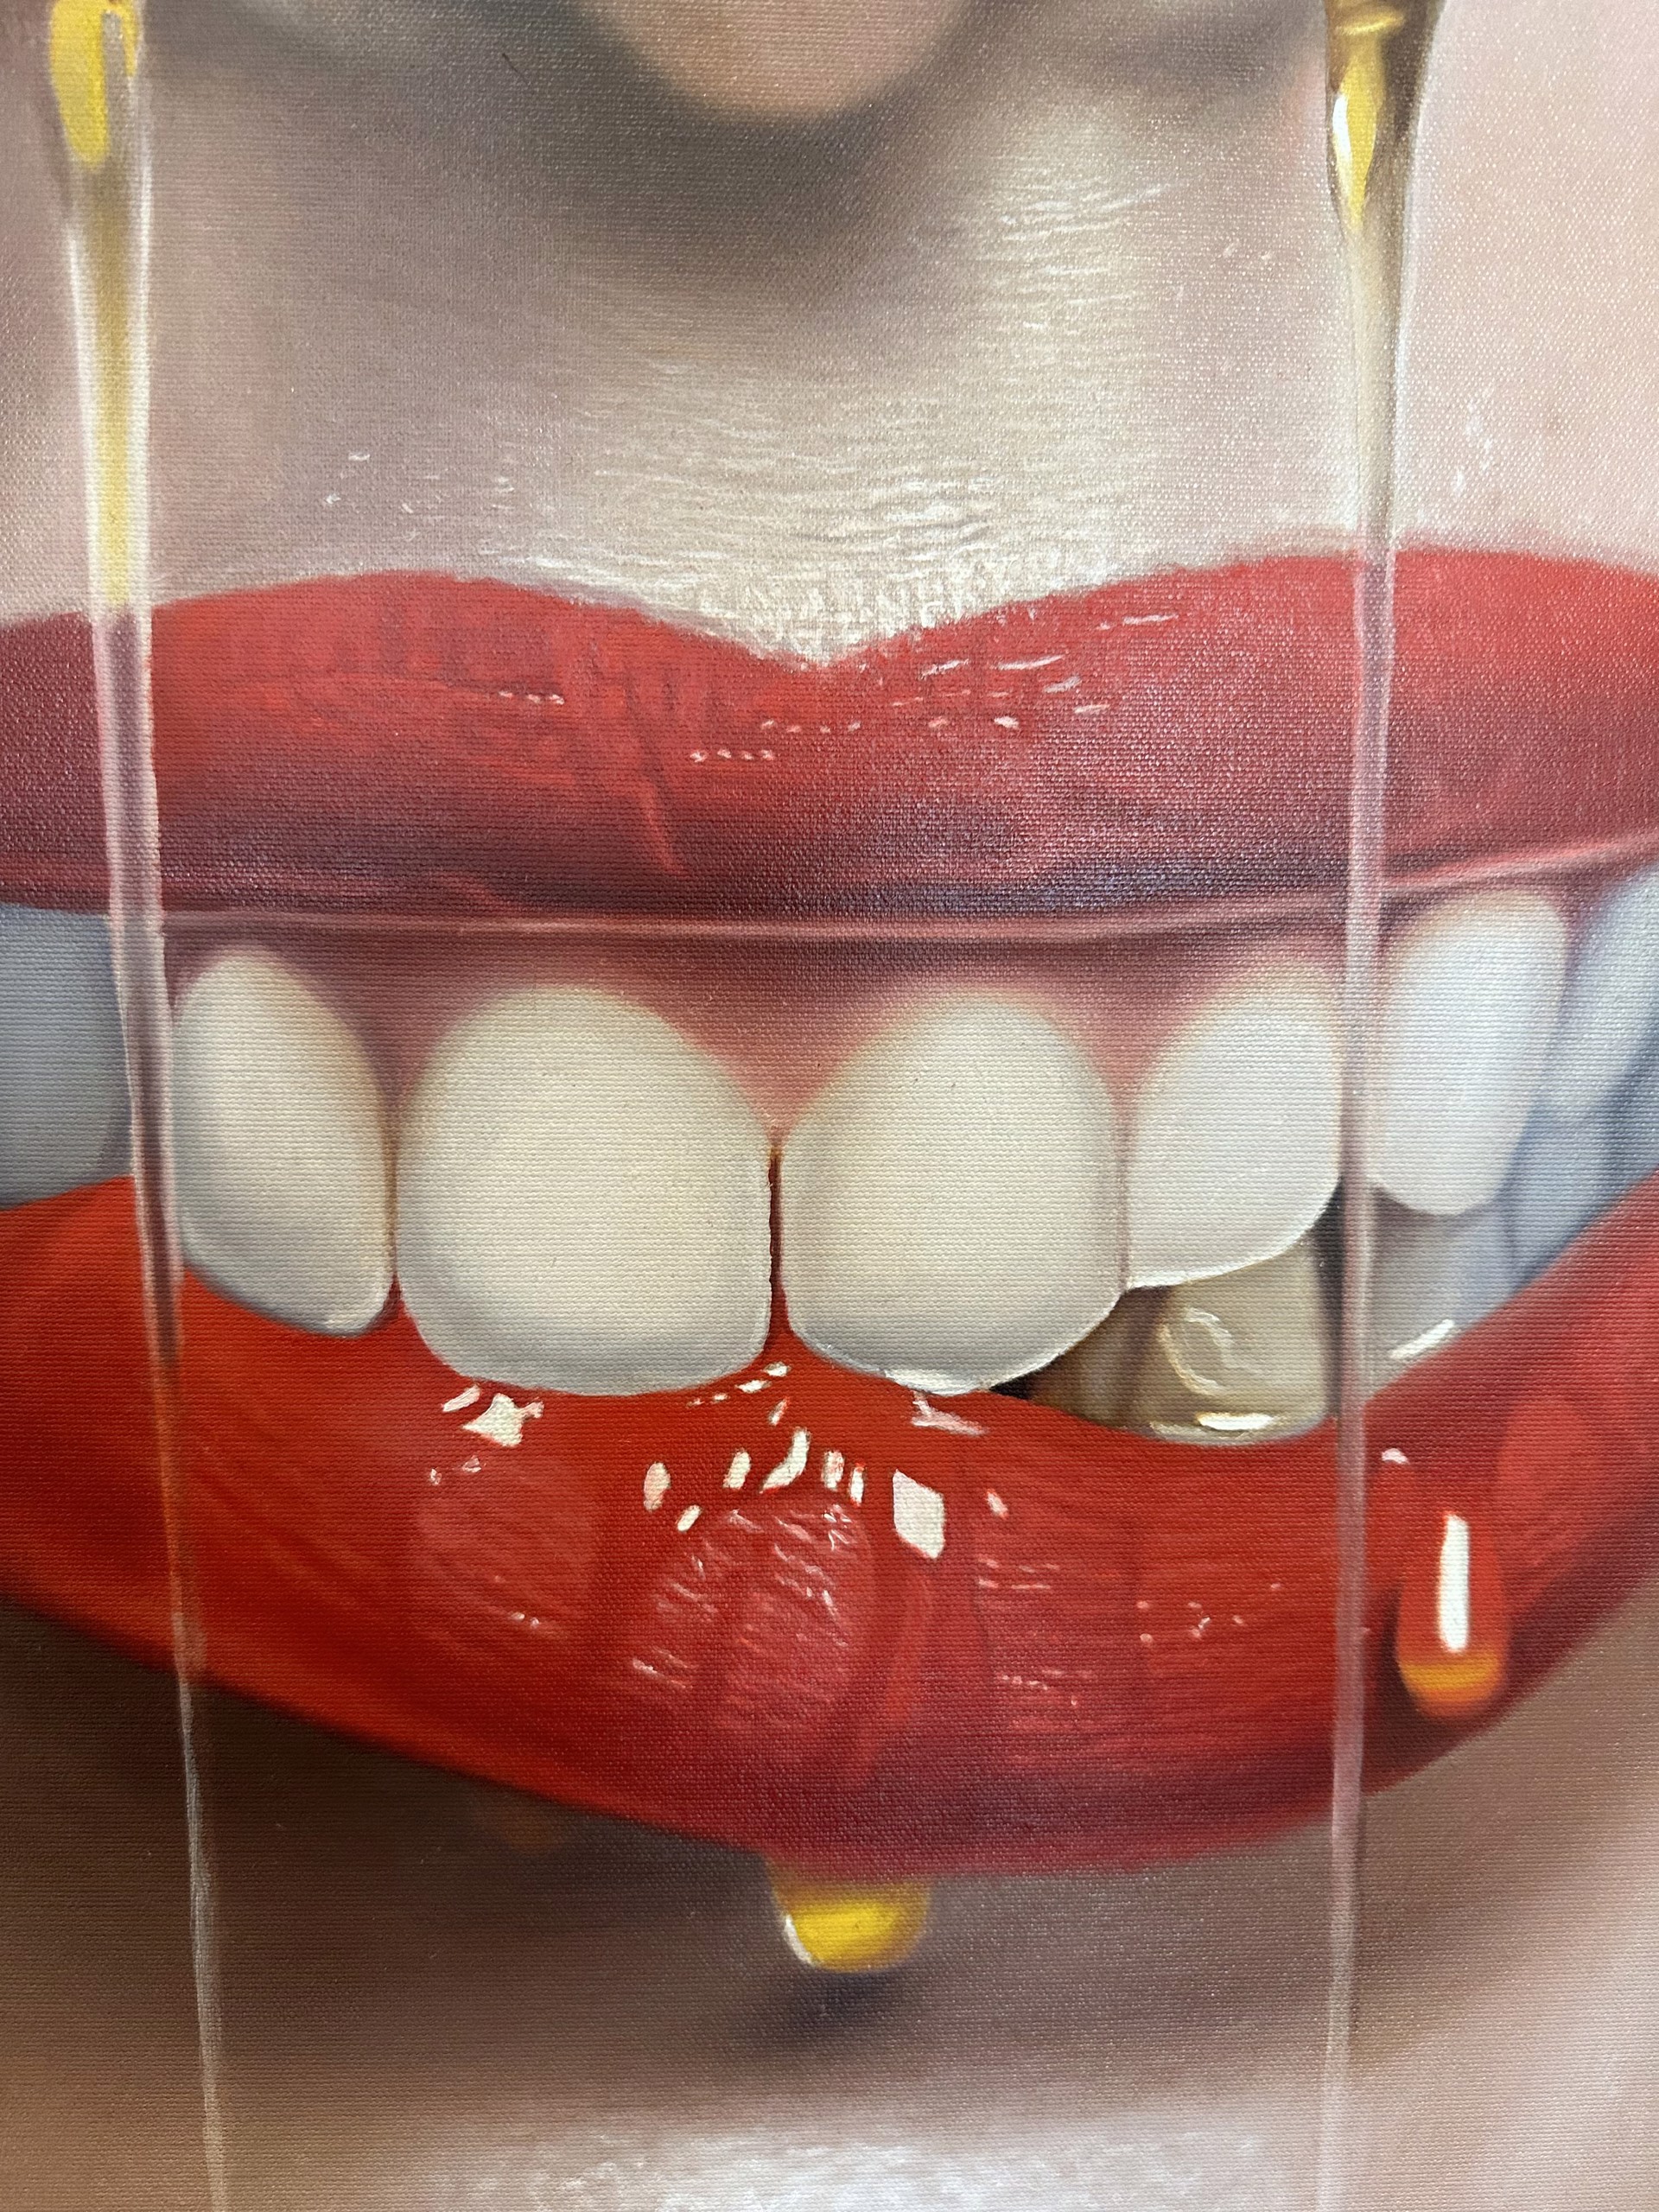 Sweet Satisfaction by Mike Dargas